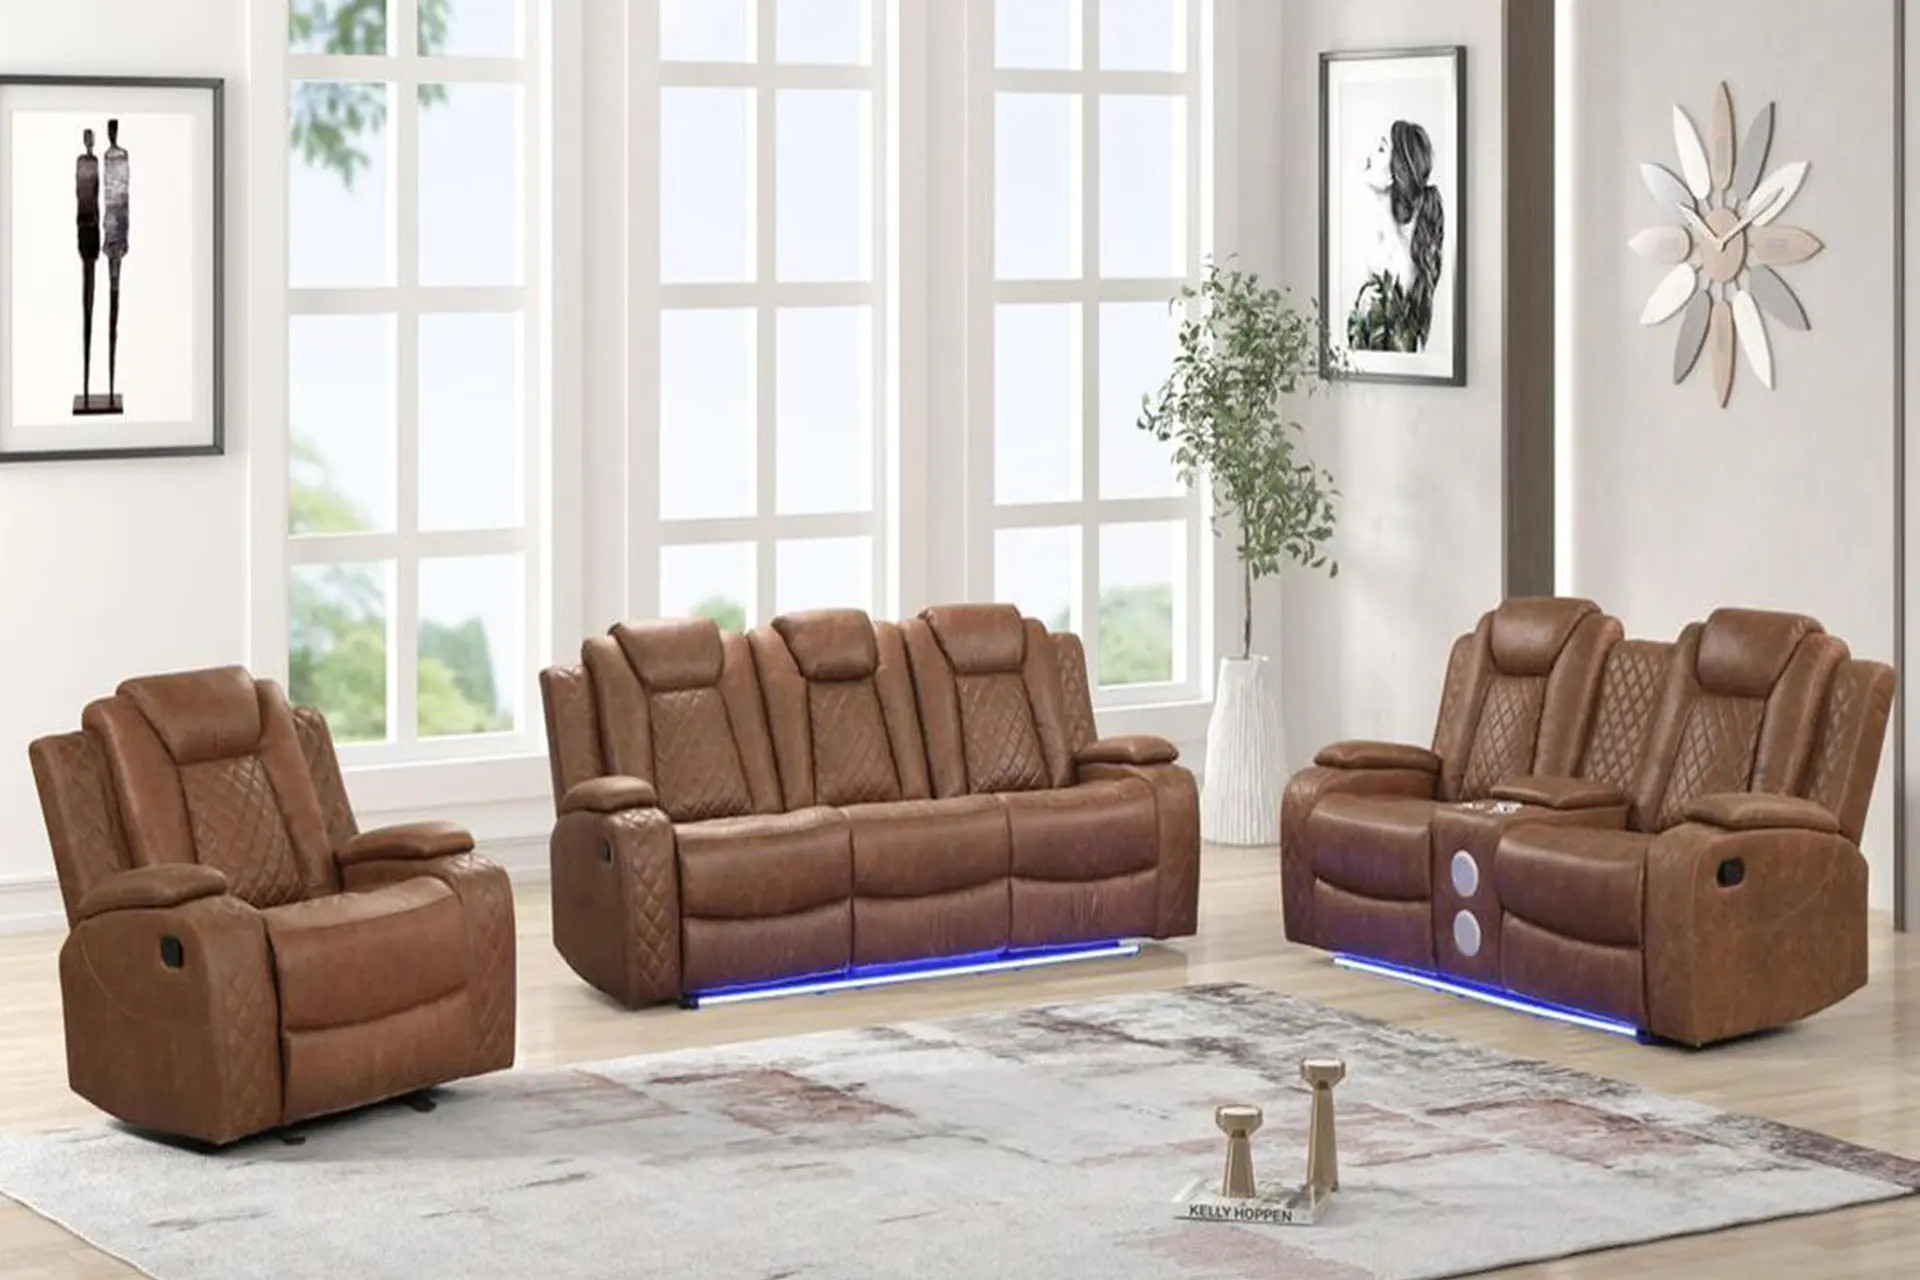 Luz Saddle Reclining Sofa, Love, and Recliner.